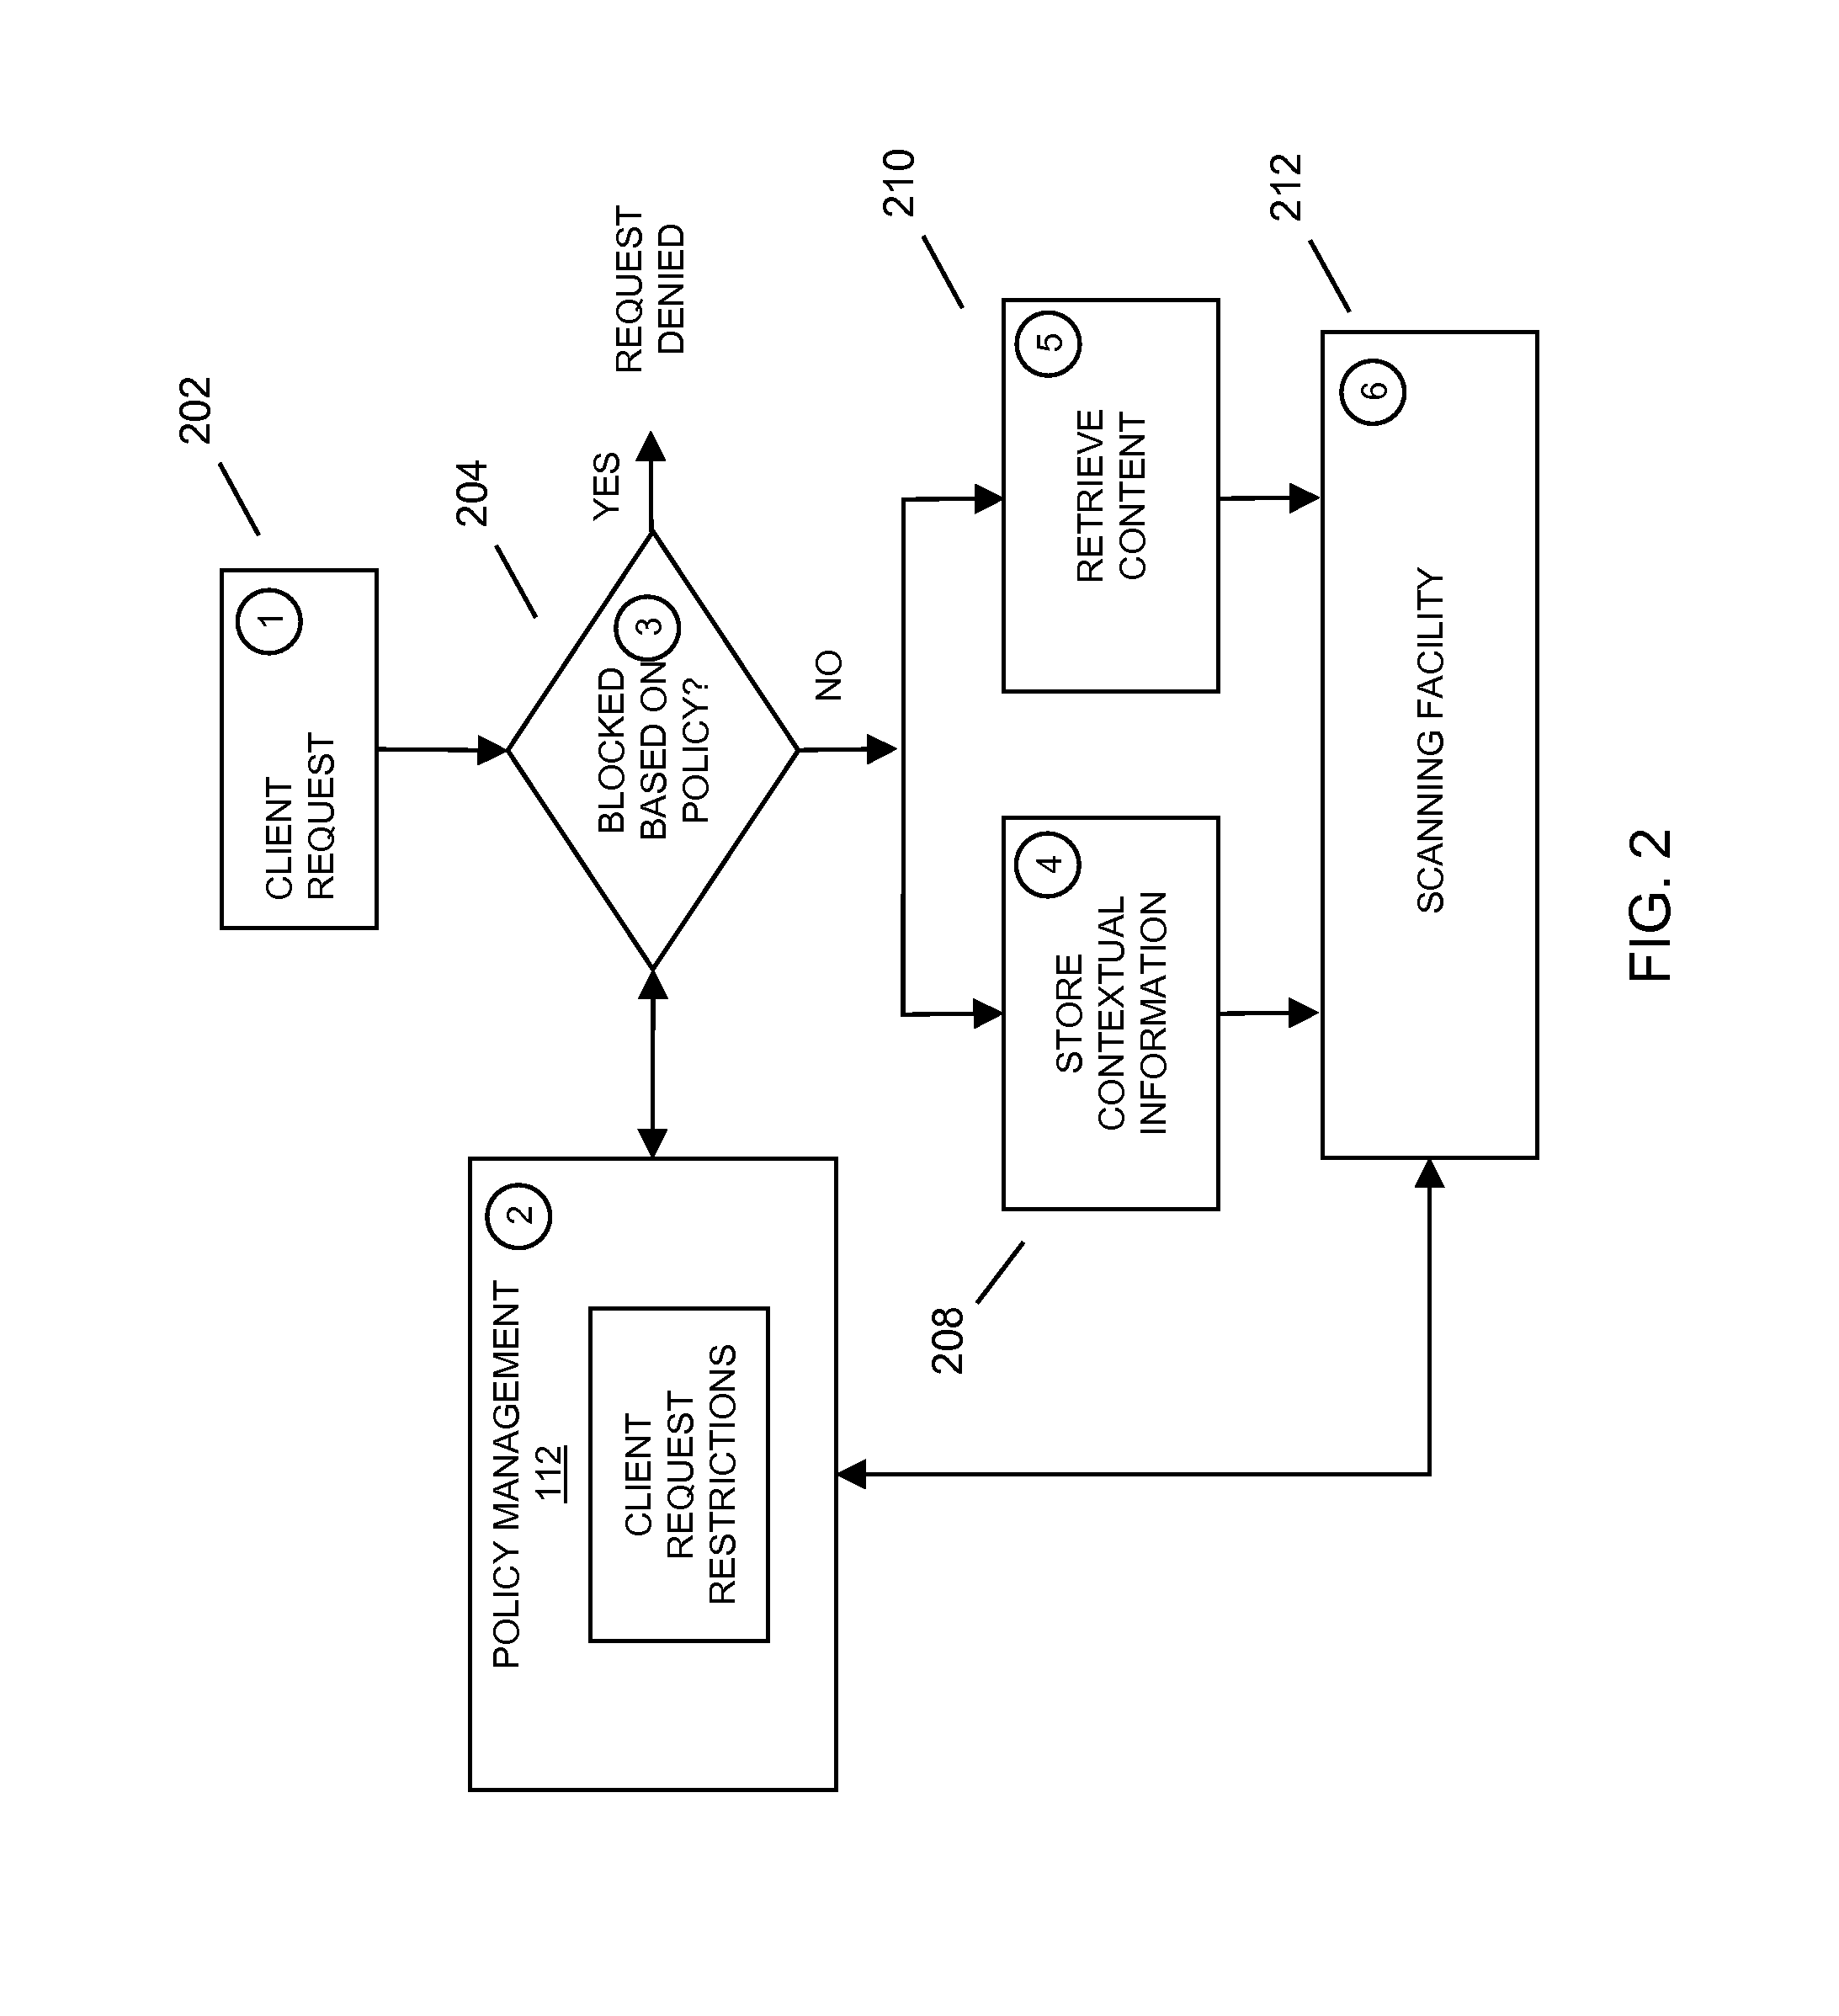 Method and system for detecting restricted content associated with retrieved content